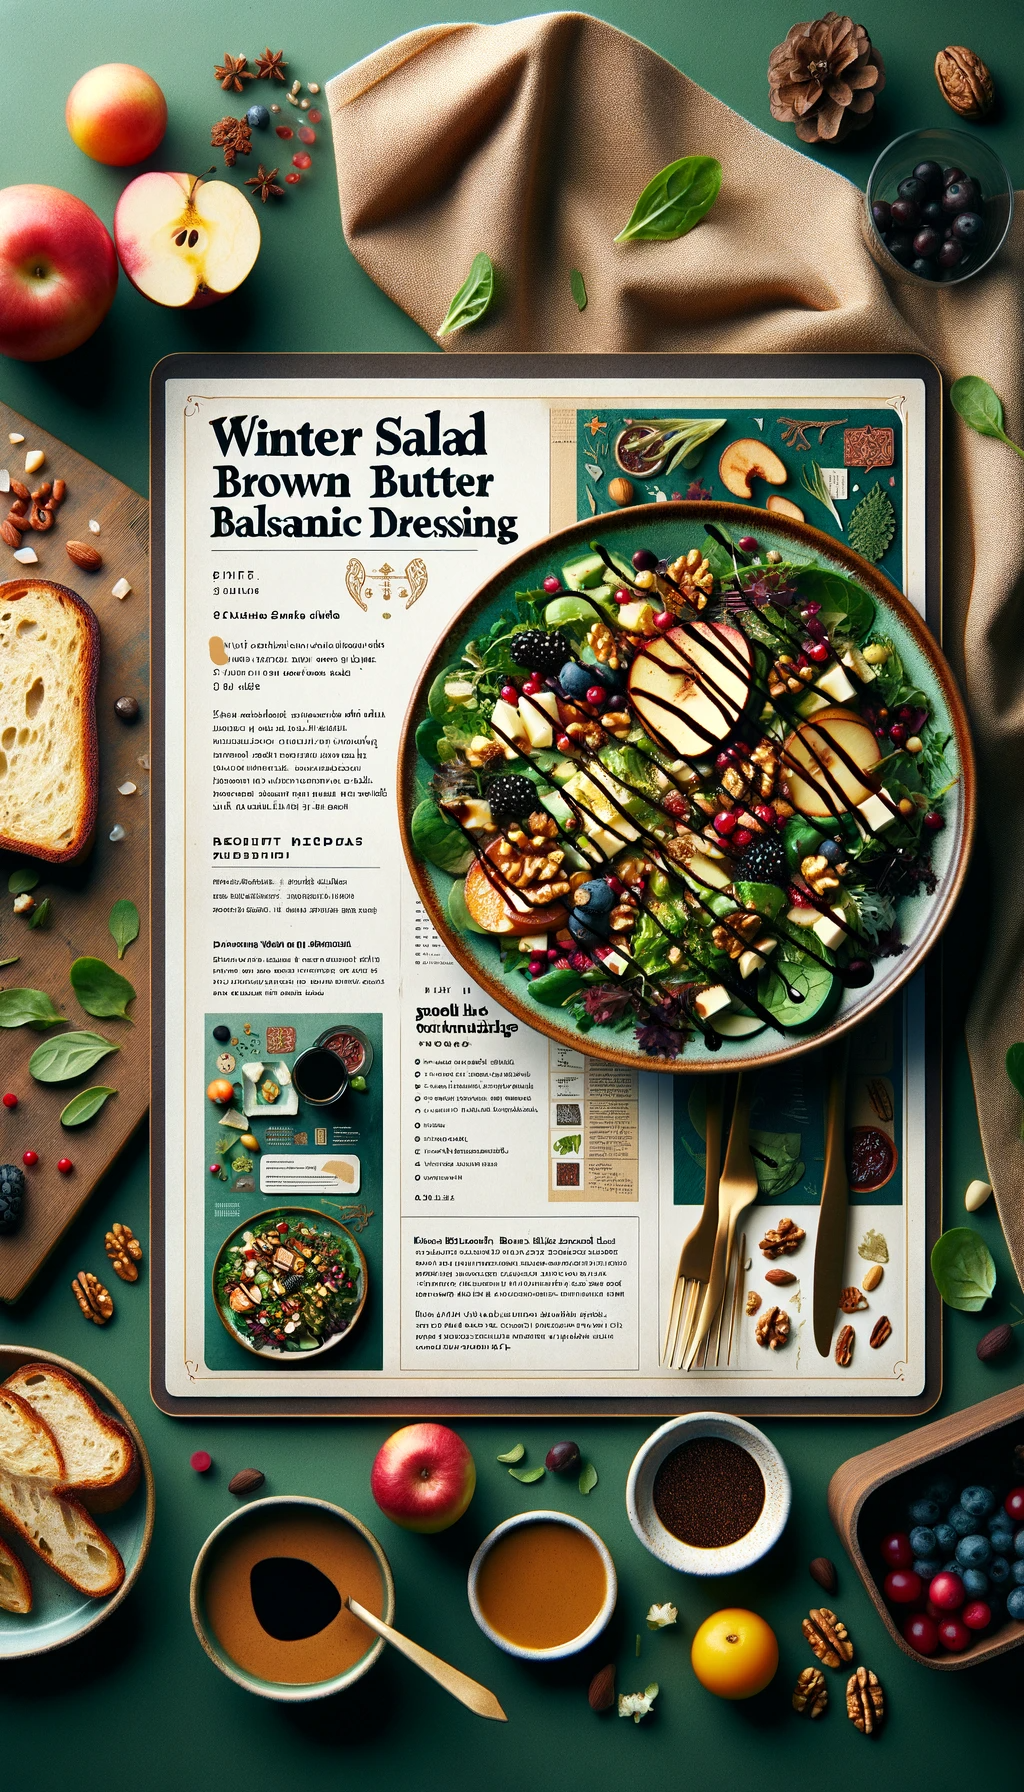 recipe for a Winter Salad with Brown Butter Balsamic Dressing